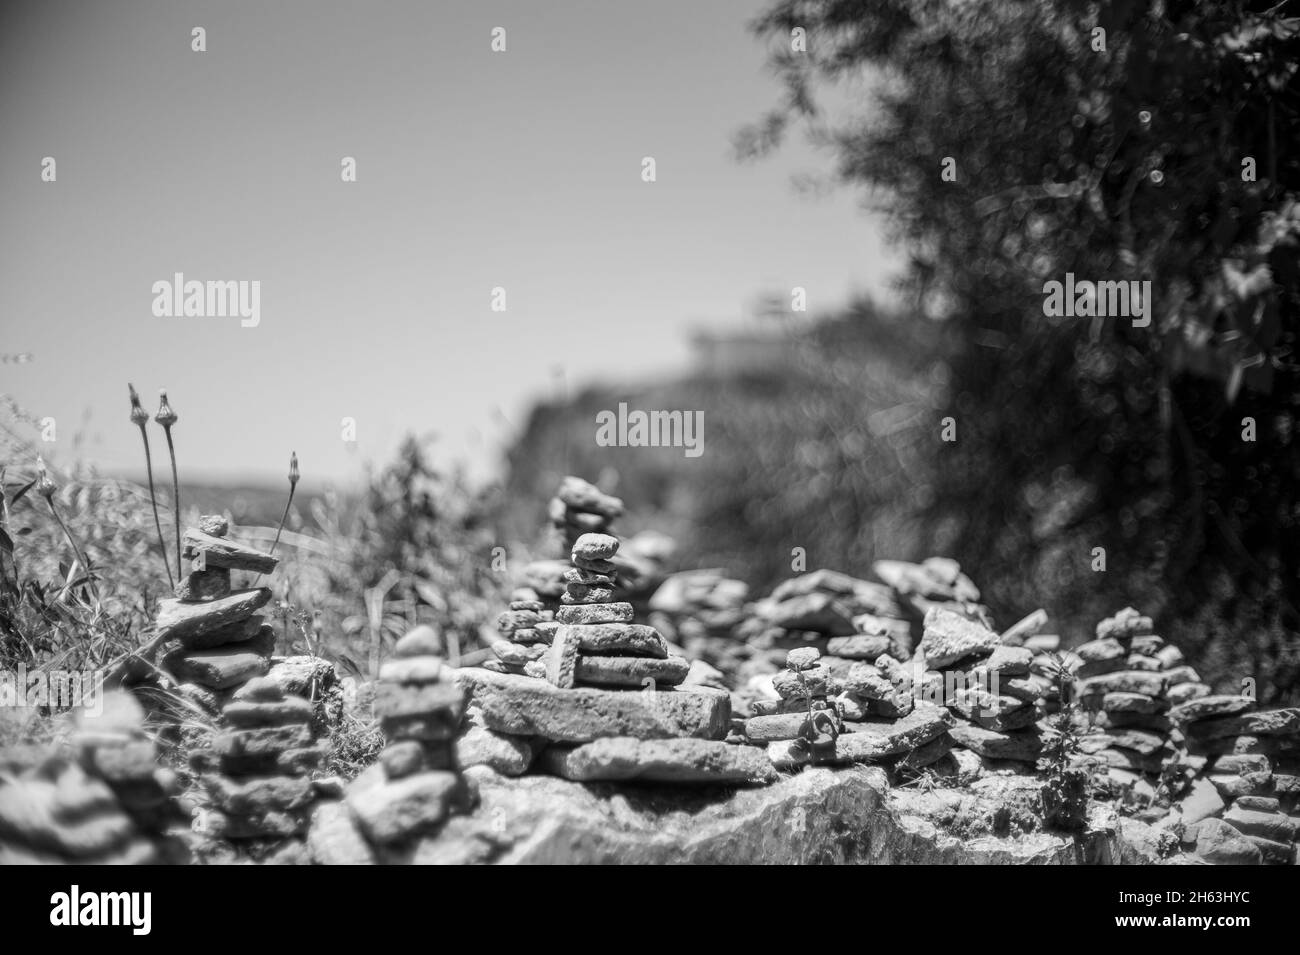 pyramids of stones and pieces of ceramics as a symbol of harmony,balance,peace of mind under the walls of the city of ronda,andalusia,spainagainst the backdrop of mountains. Stock Photo